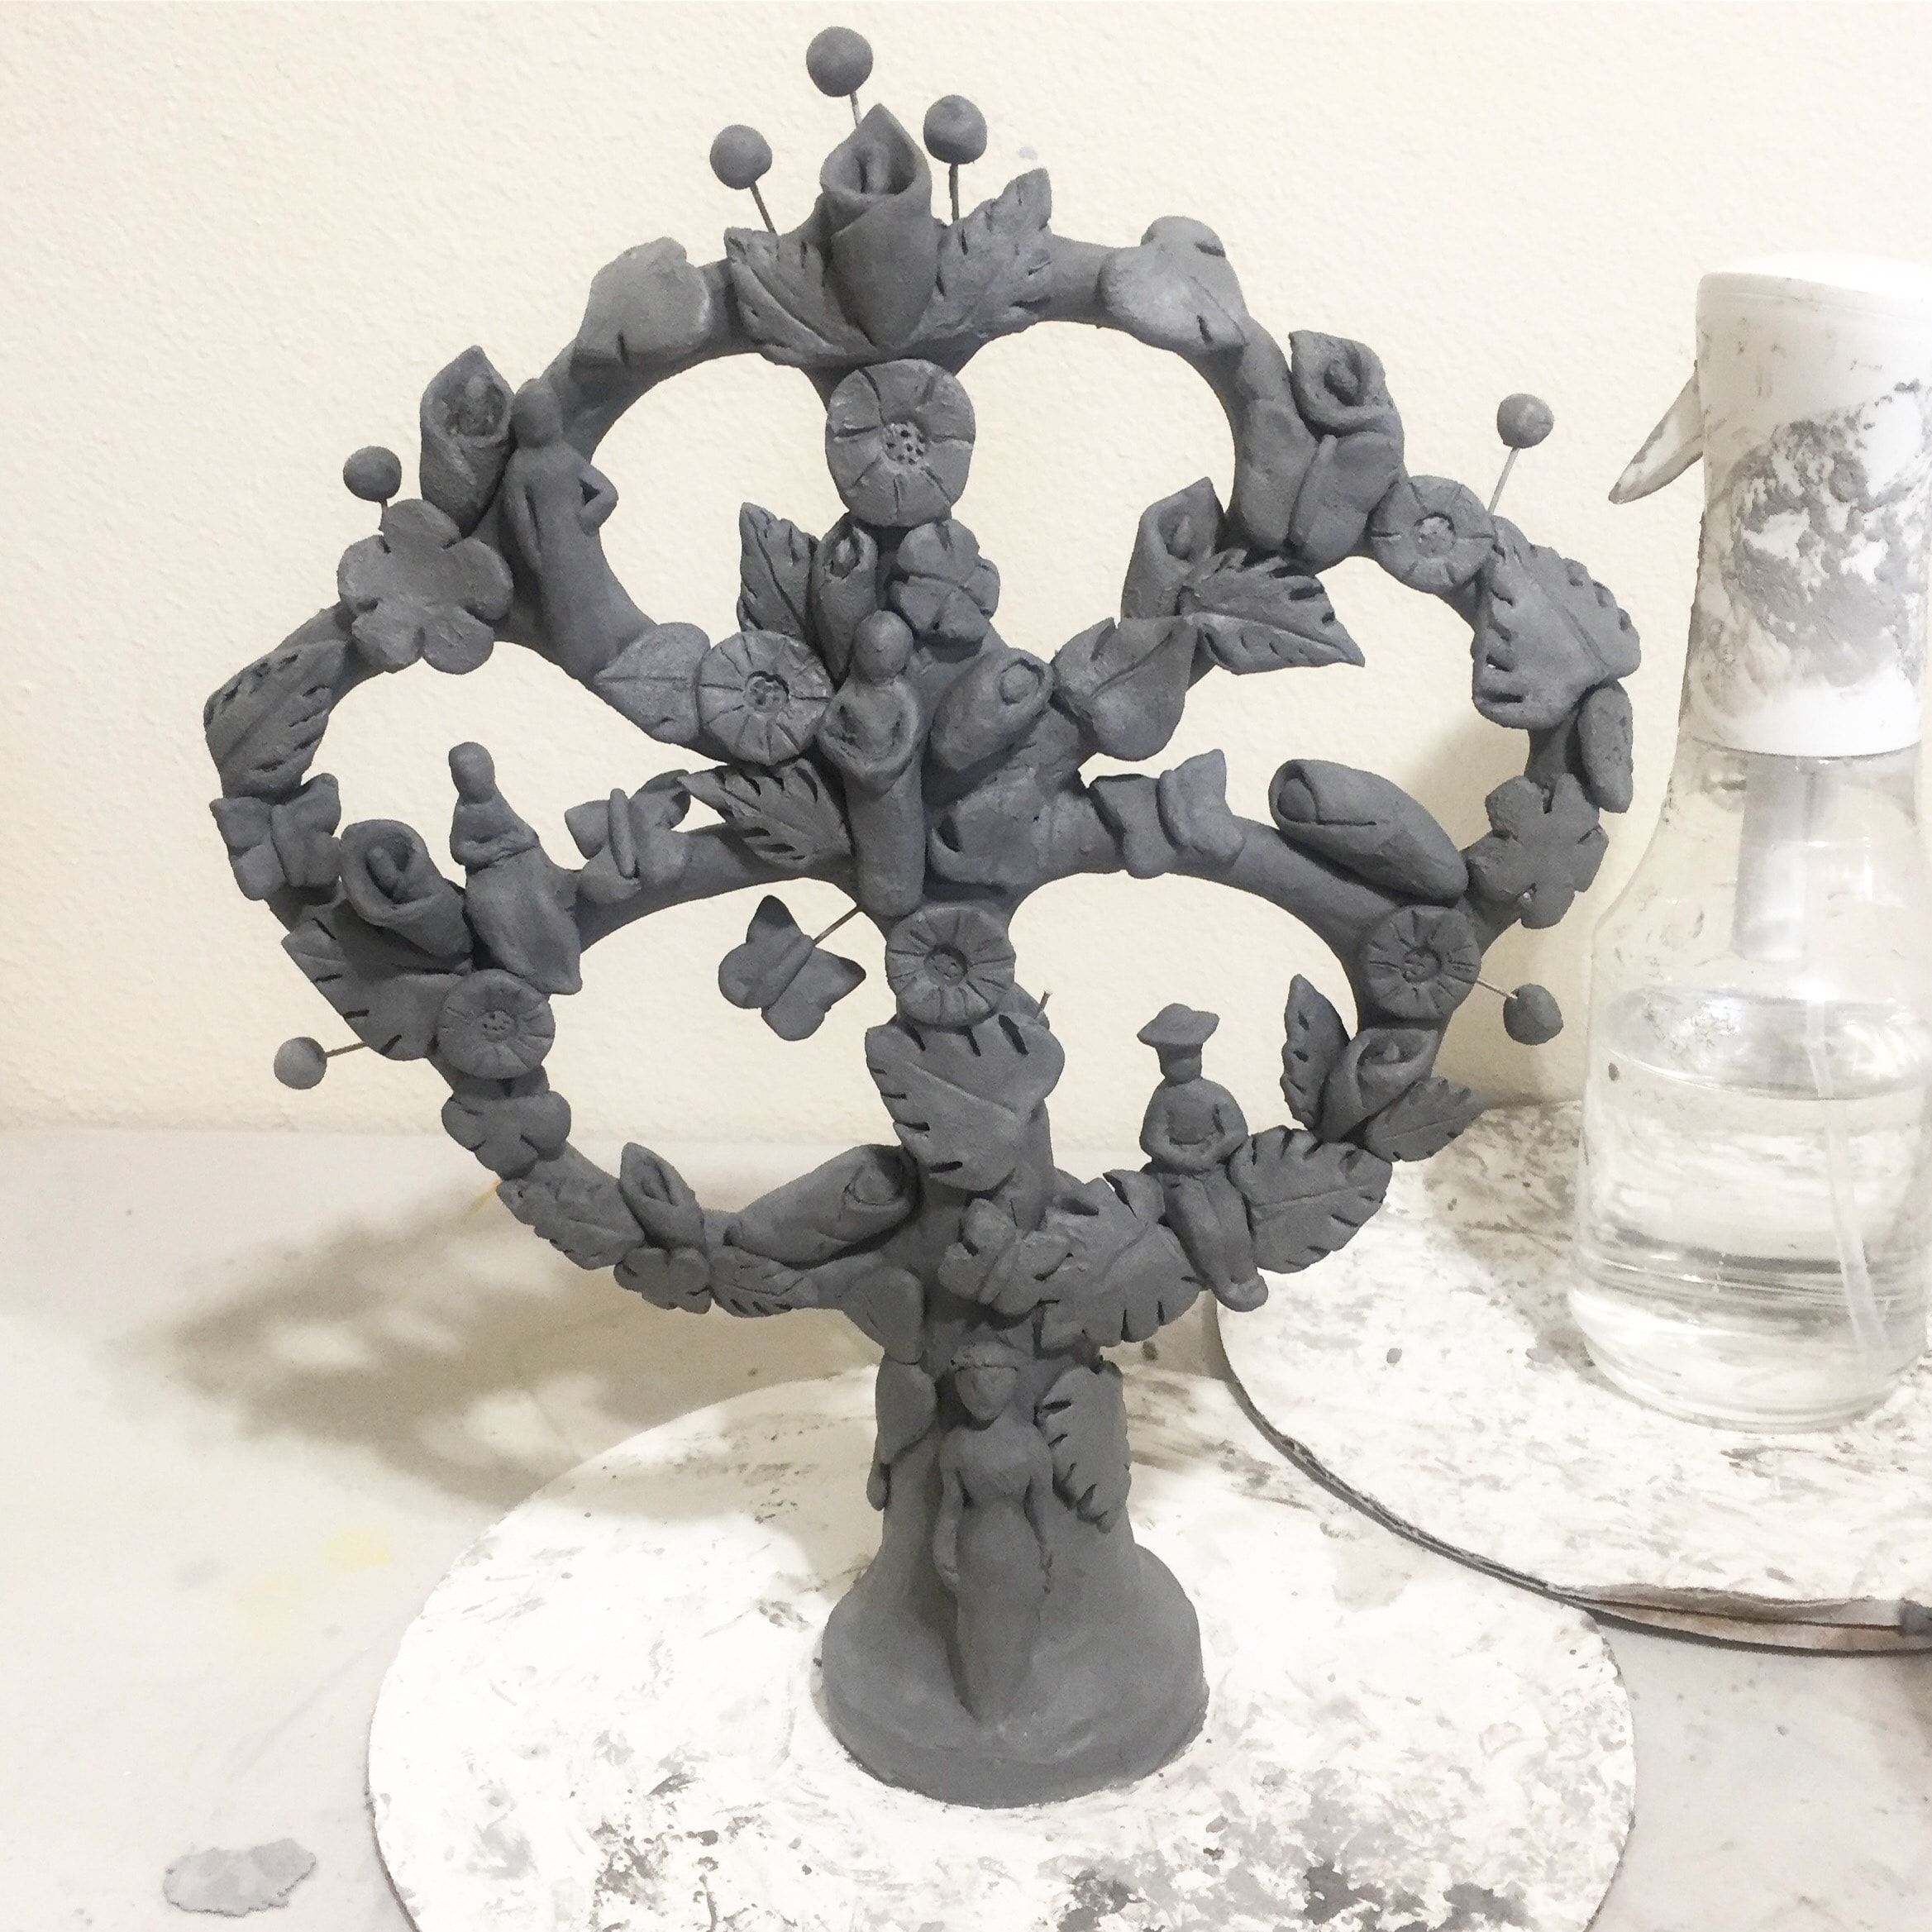 A clay sculpture featuring lots of flowers and plants.